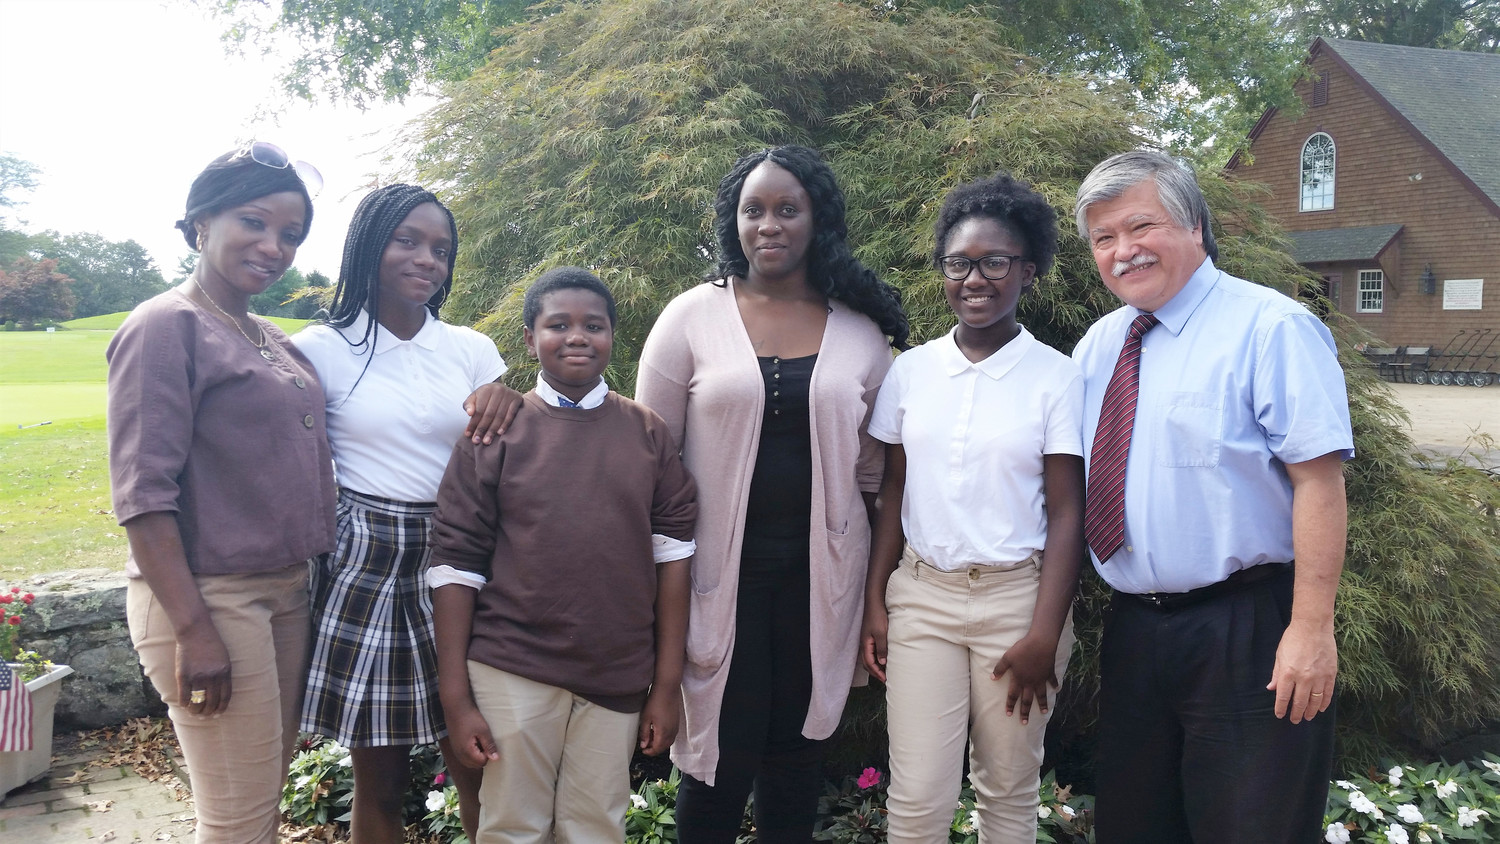 Bishop McVinney School Principal Louis Hebert, far right, with students and parents/alumni in September 2017.